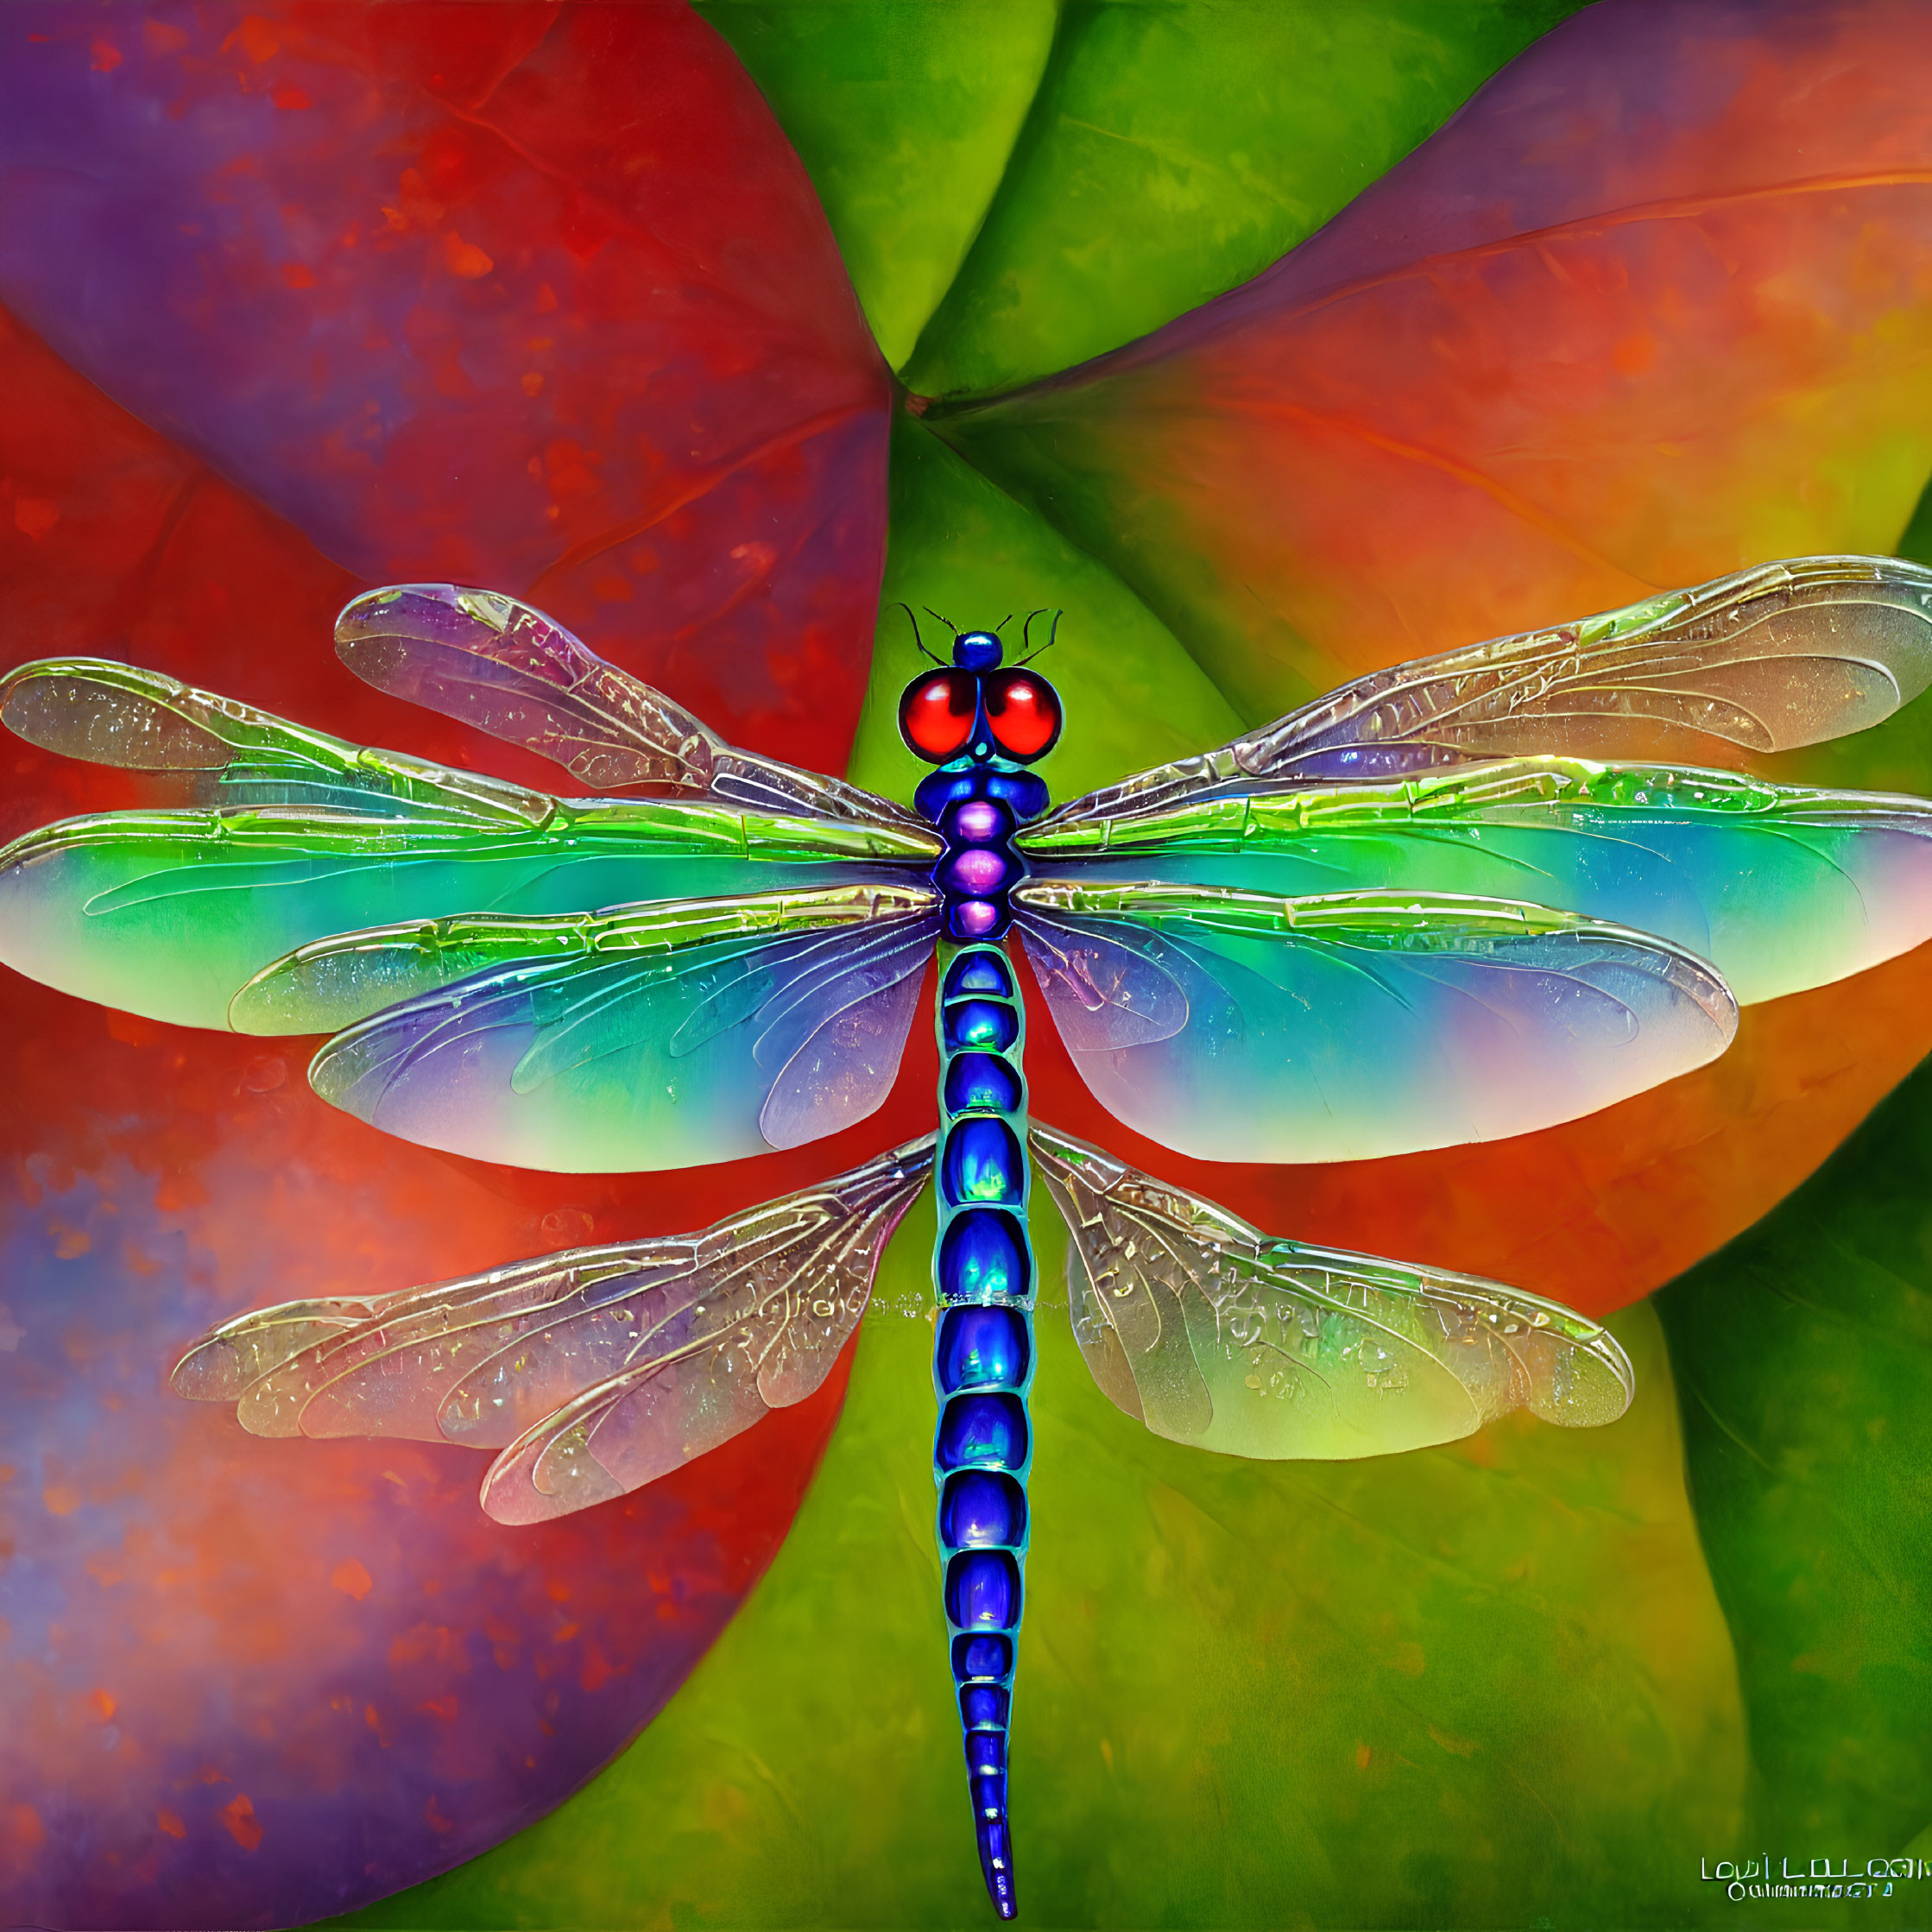 Close-up image of vibrant blue dragonfly on multicolored leafy background